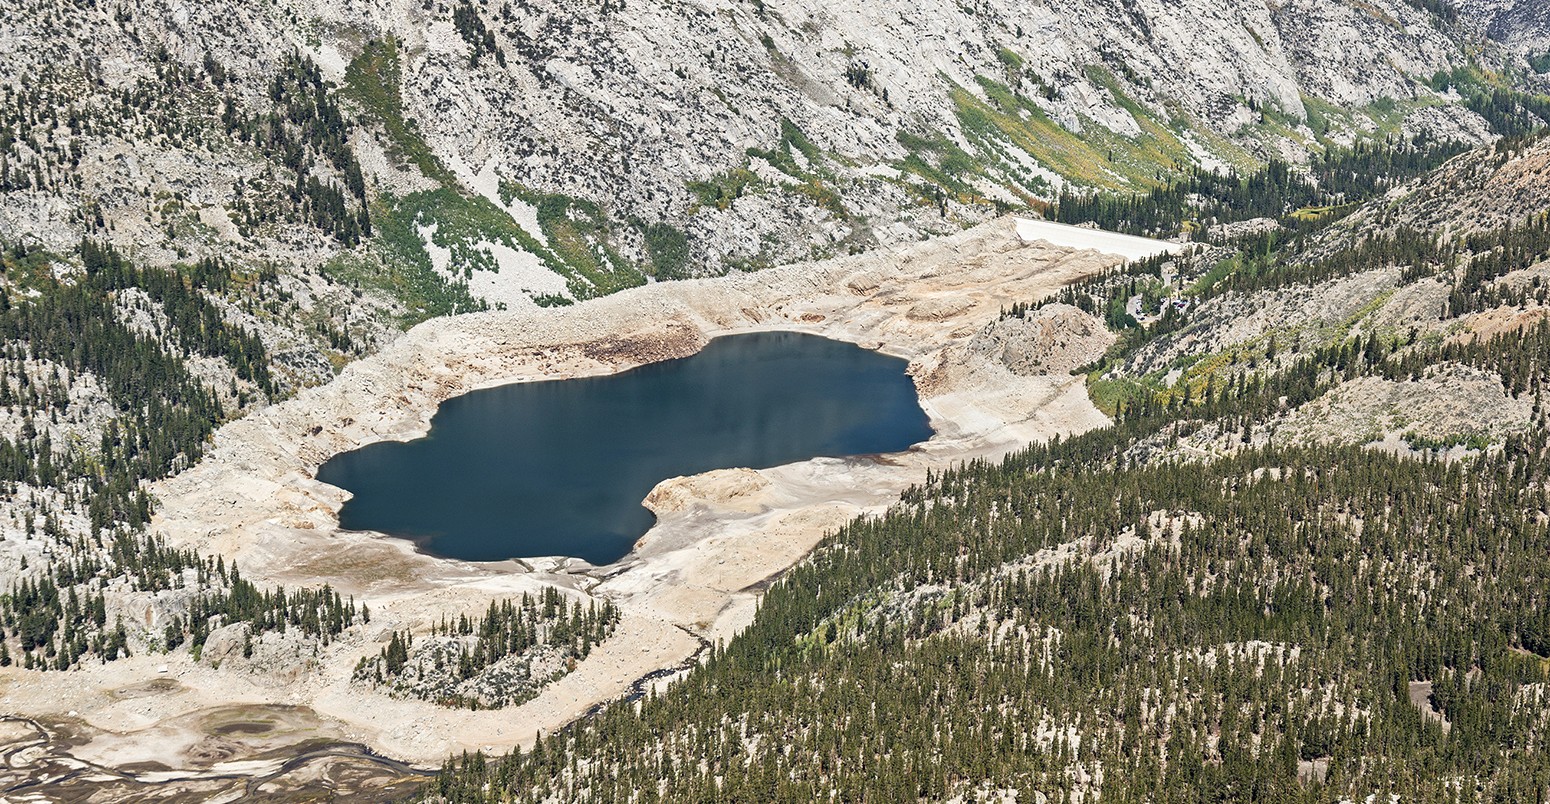 Aerial view showing low water level in South Lake reservoir in California because of drought.